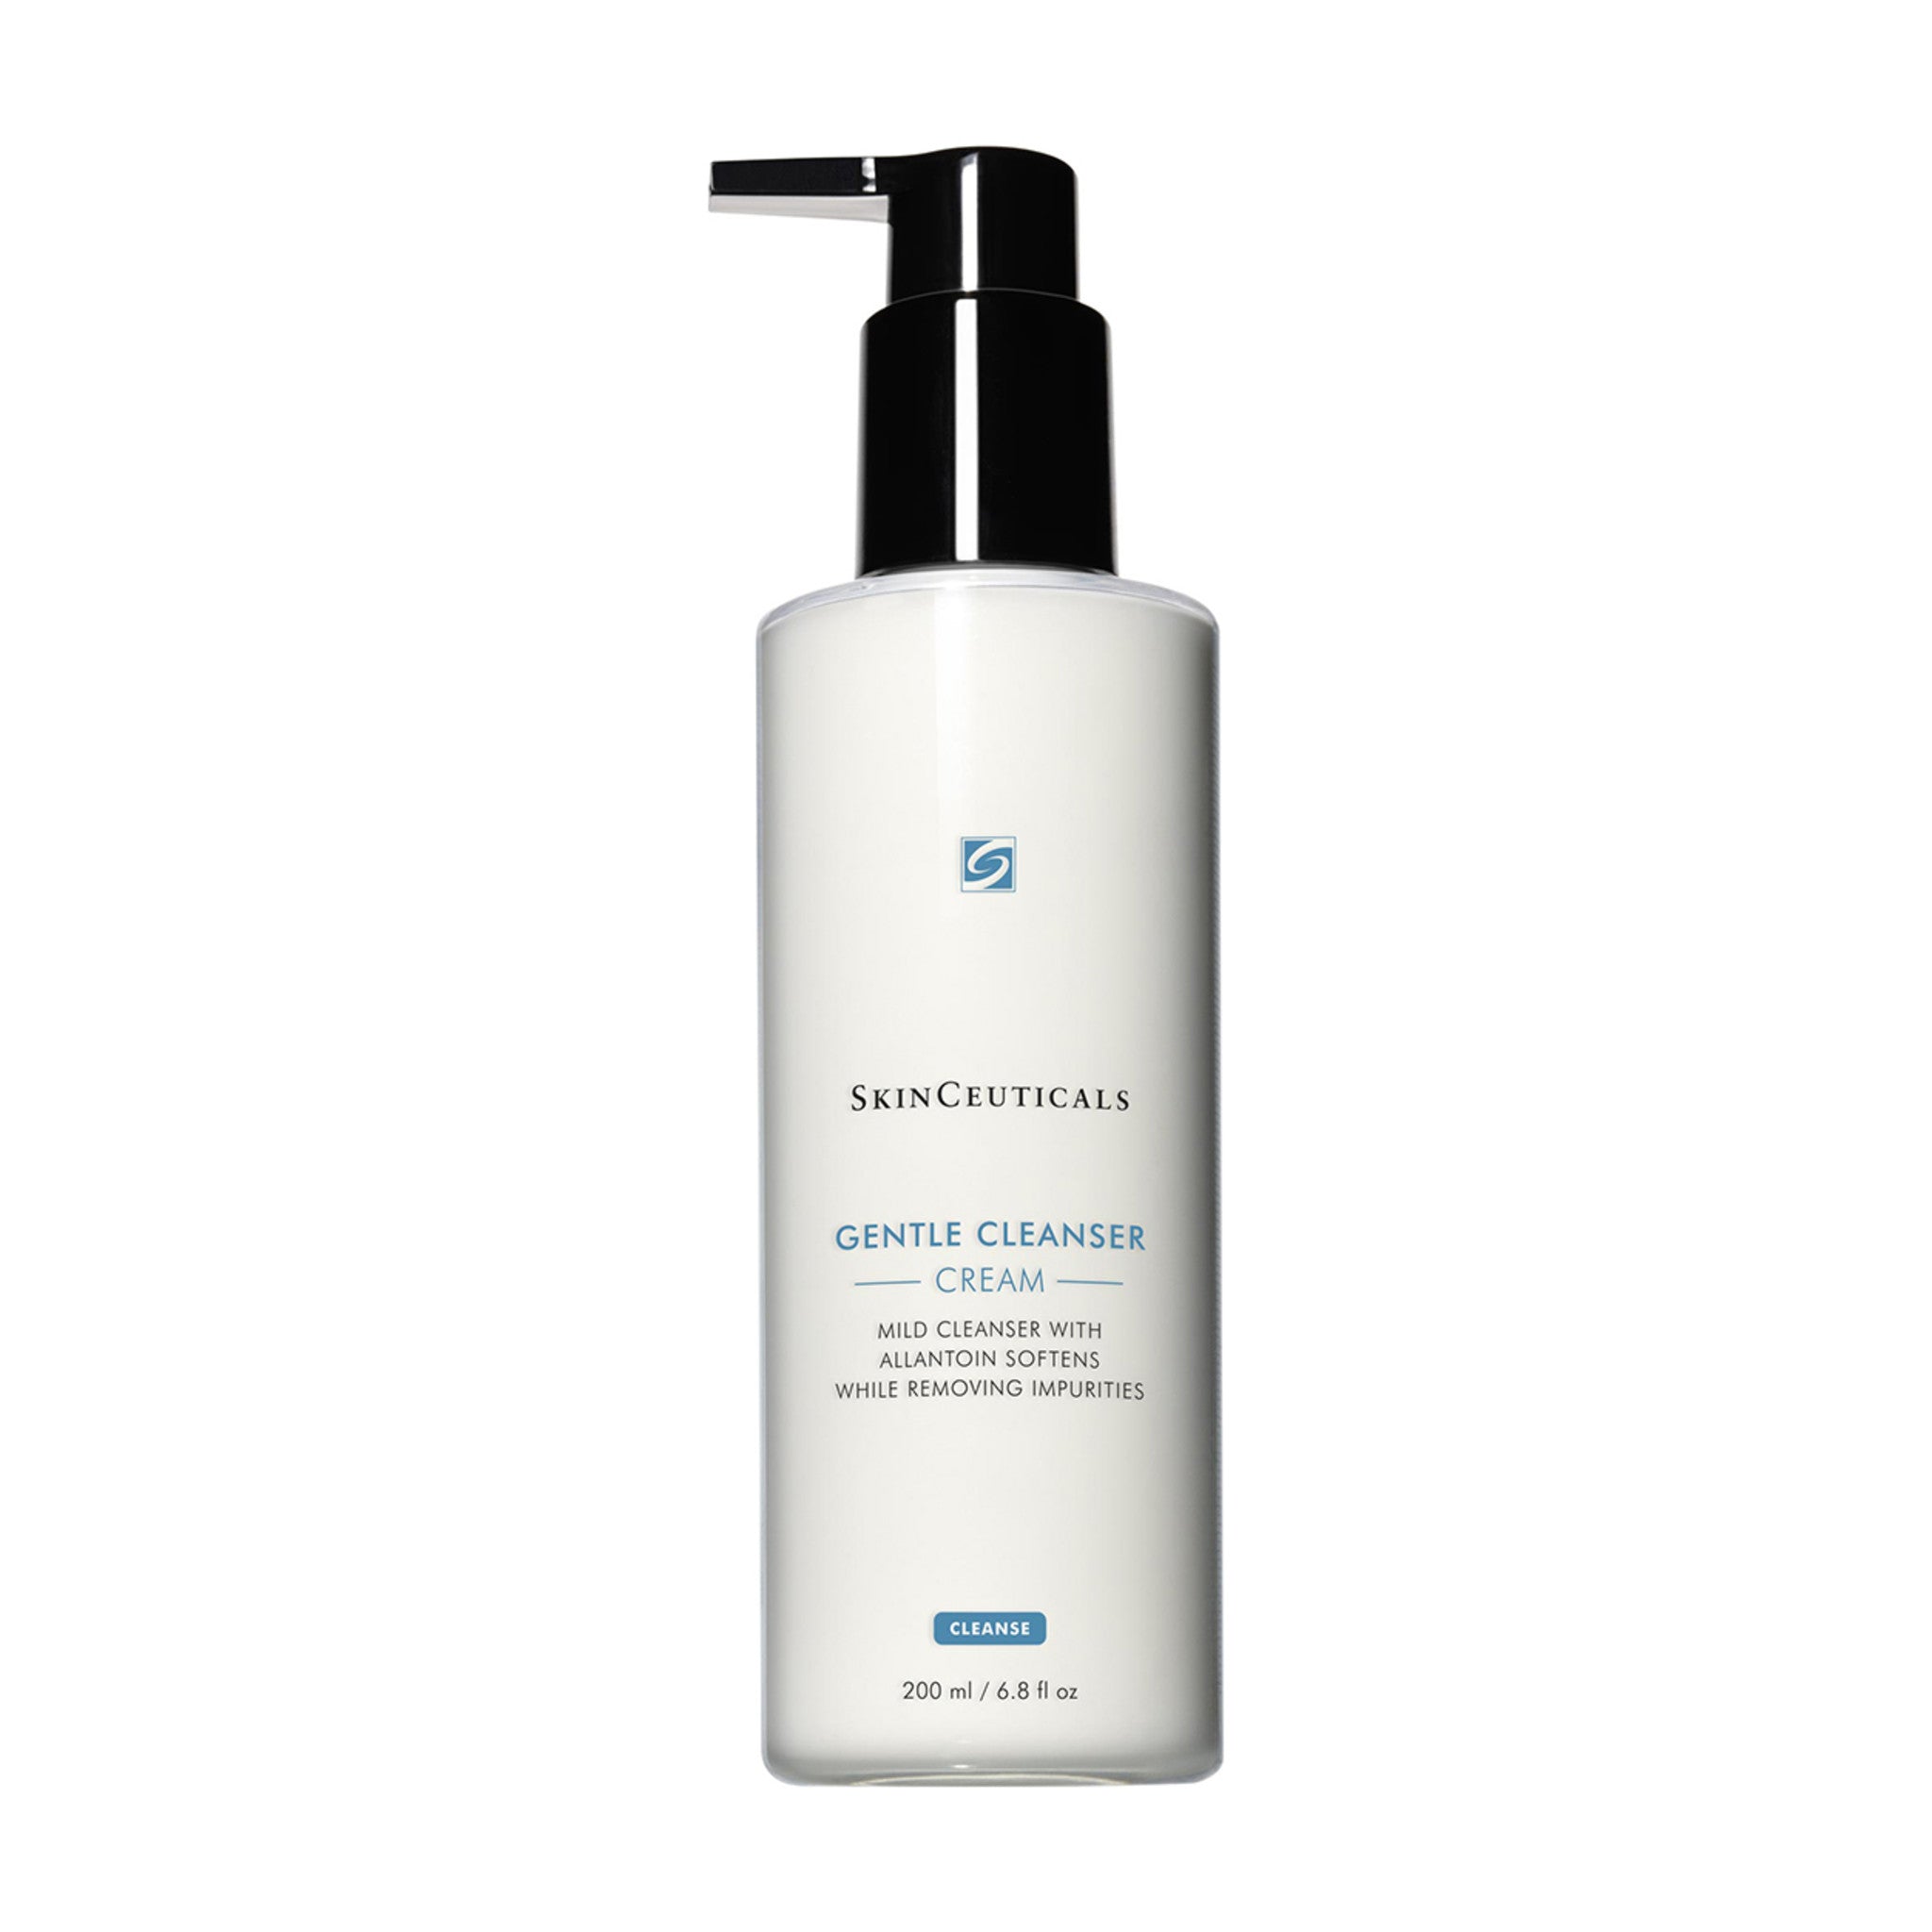 SkinCeuticals Gentle Cleanser main image.